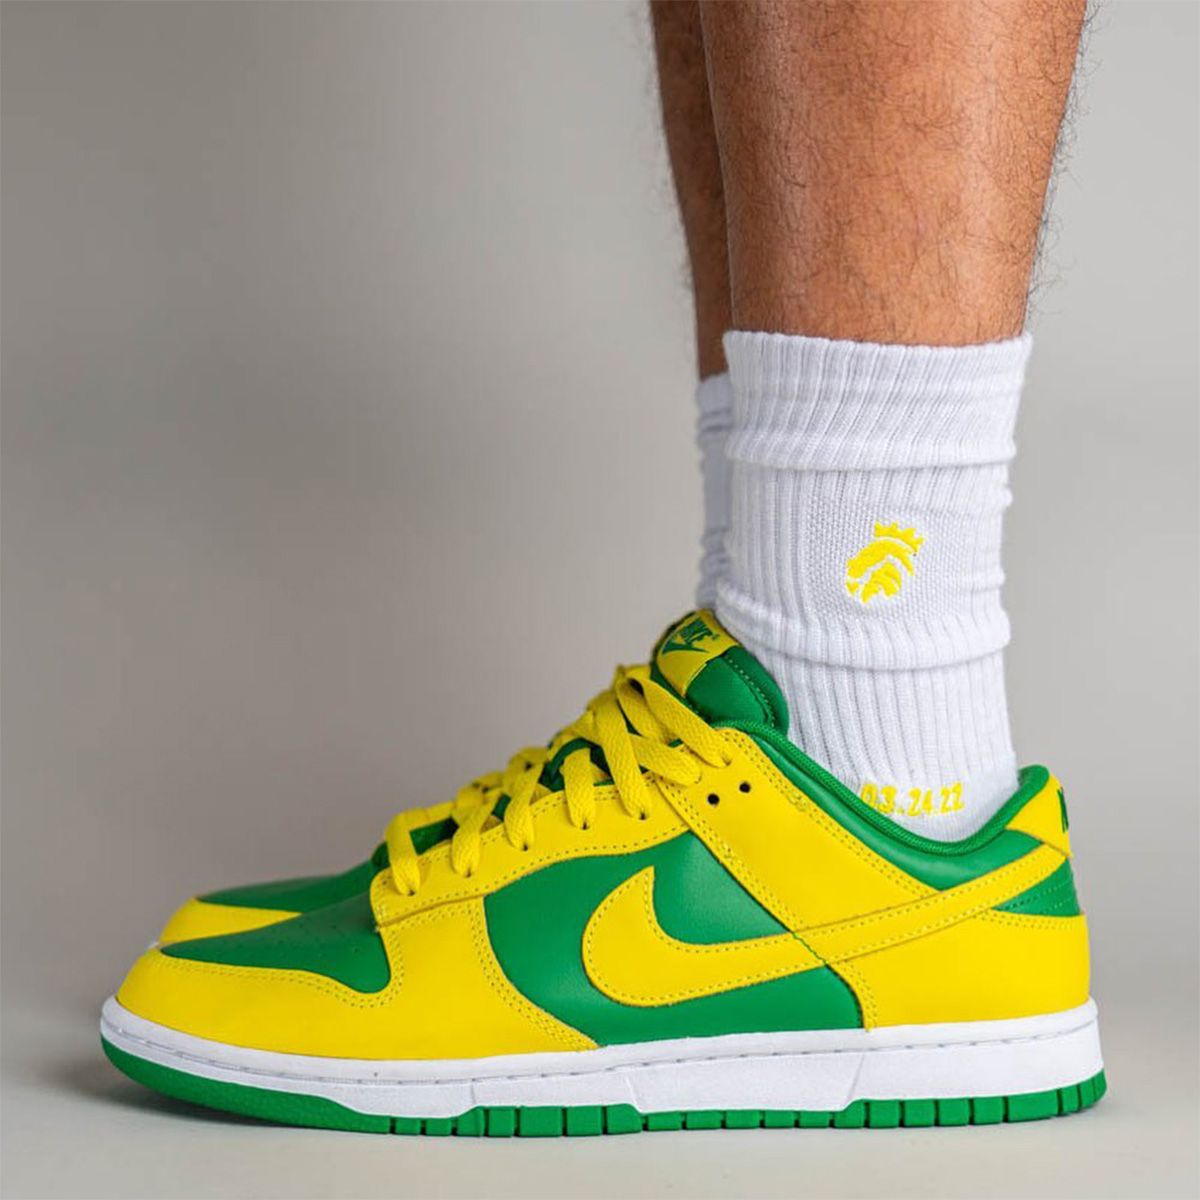 Where to Buy the Nike Dunk Low “Reverse Brazil” (Oregon) | House ...